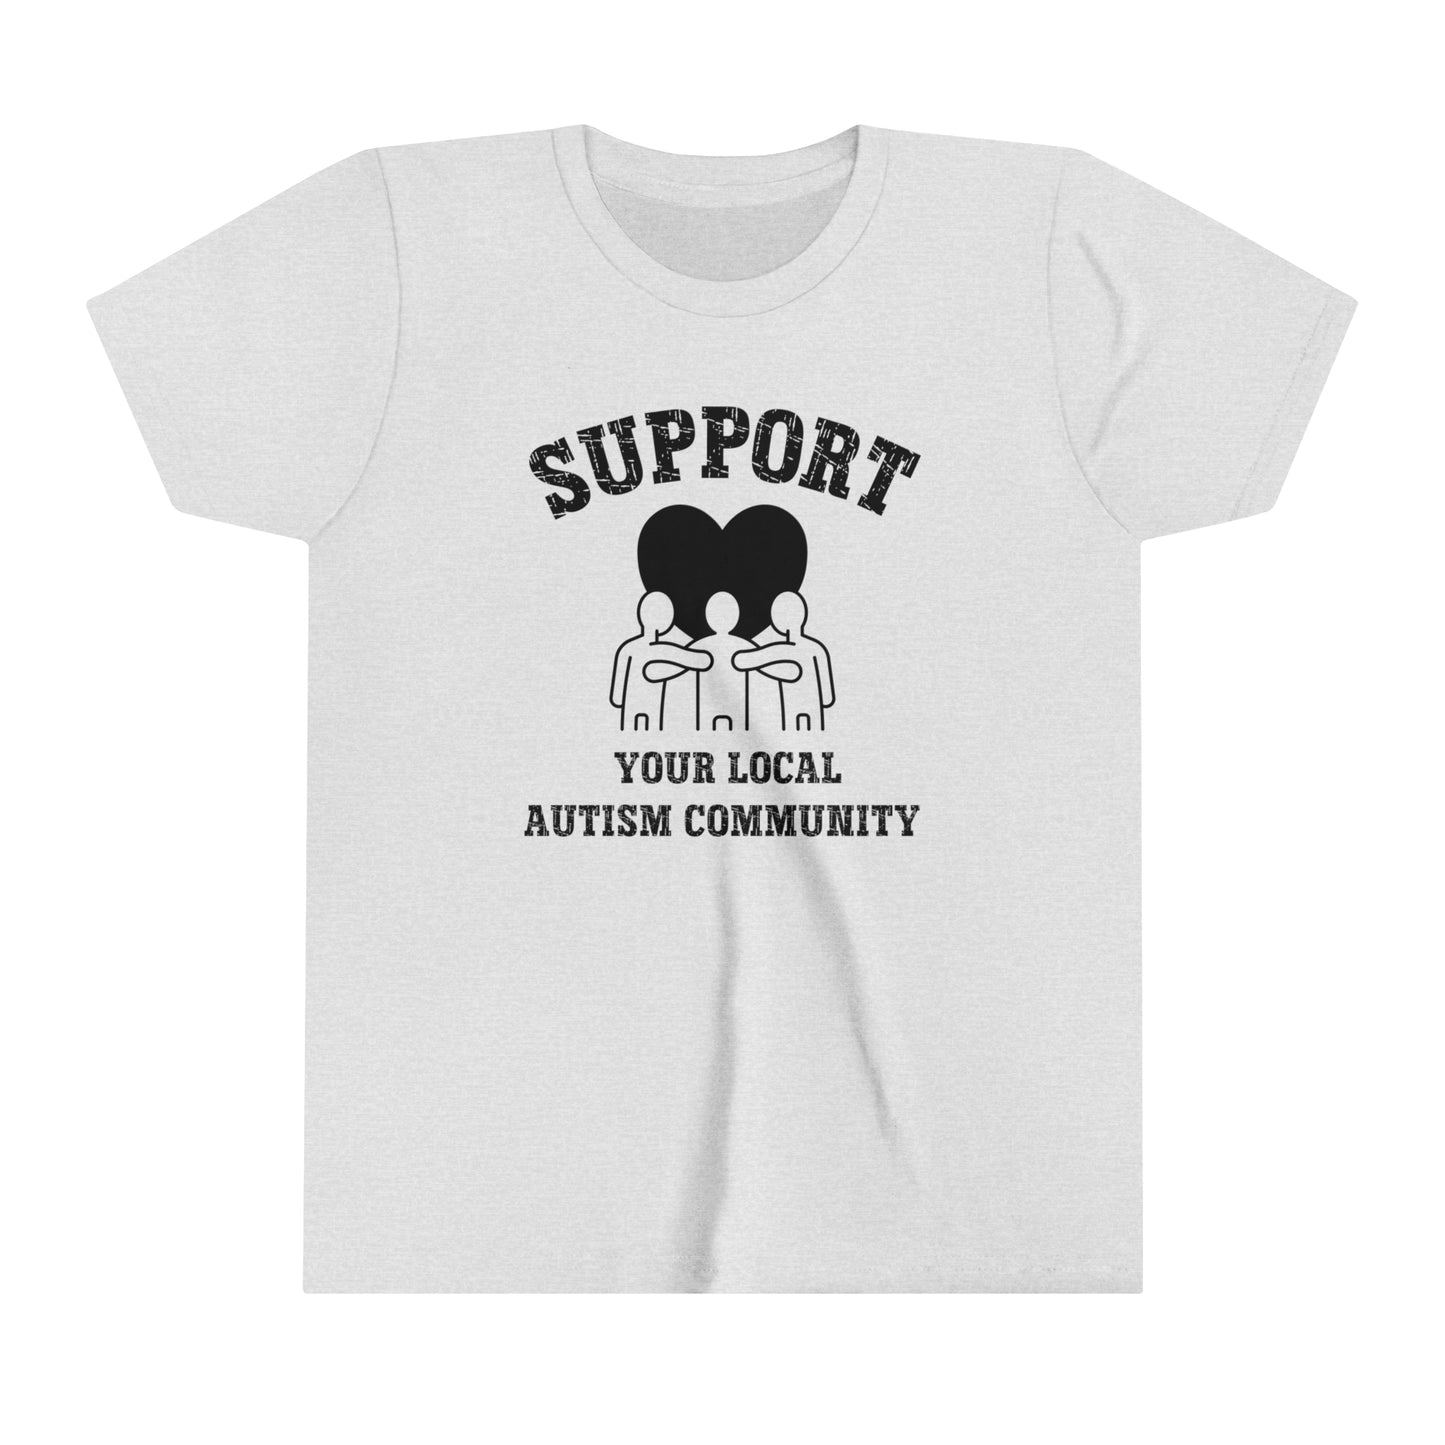 Support Autism Community Autism Advocate Youth Shirt